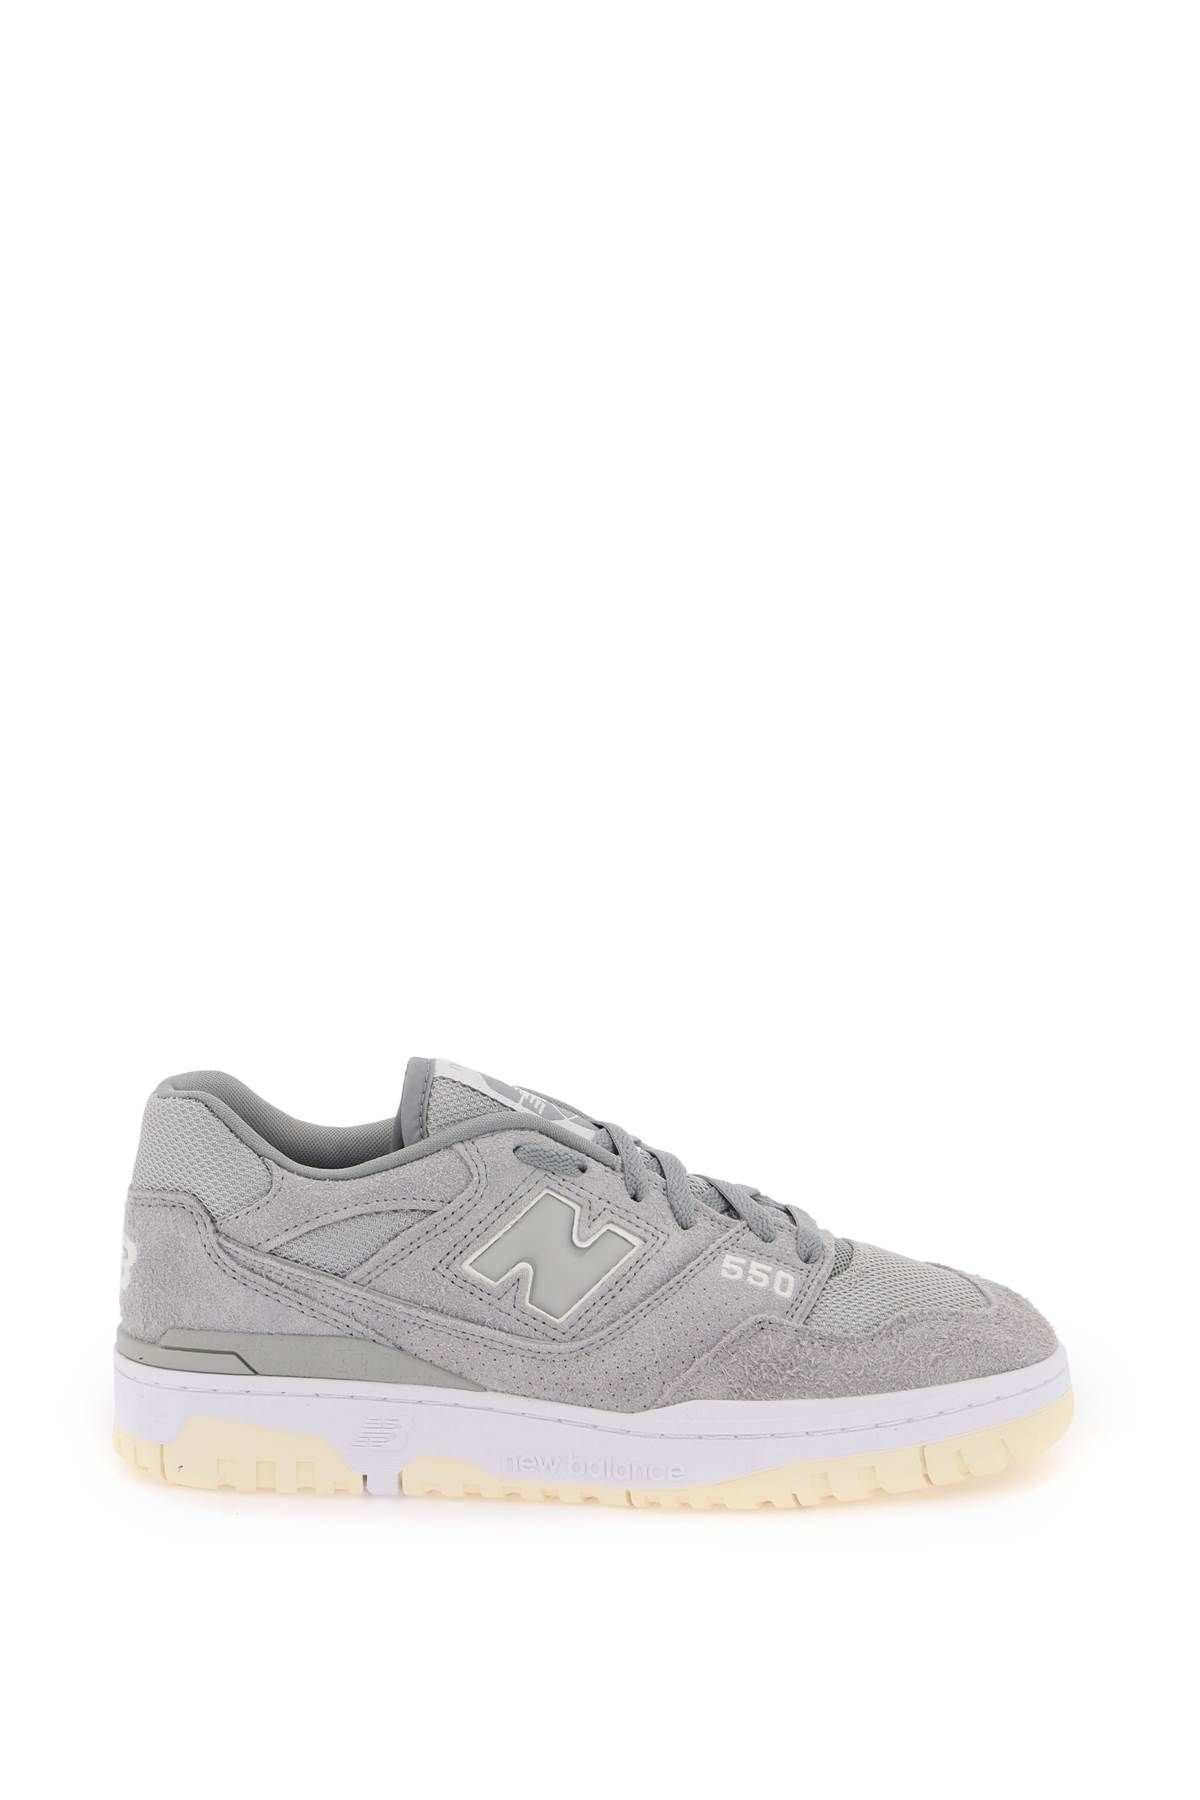 Shop New Balance 550 Sneakers In Grey